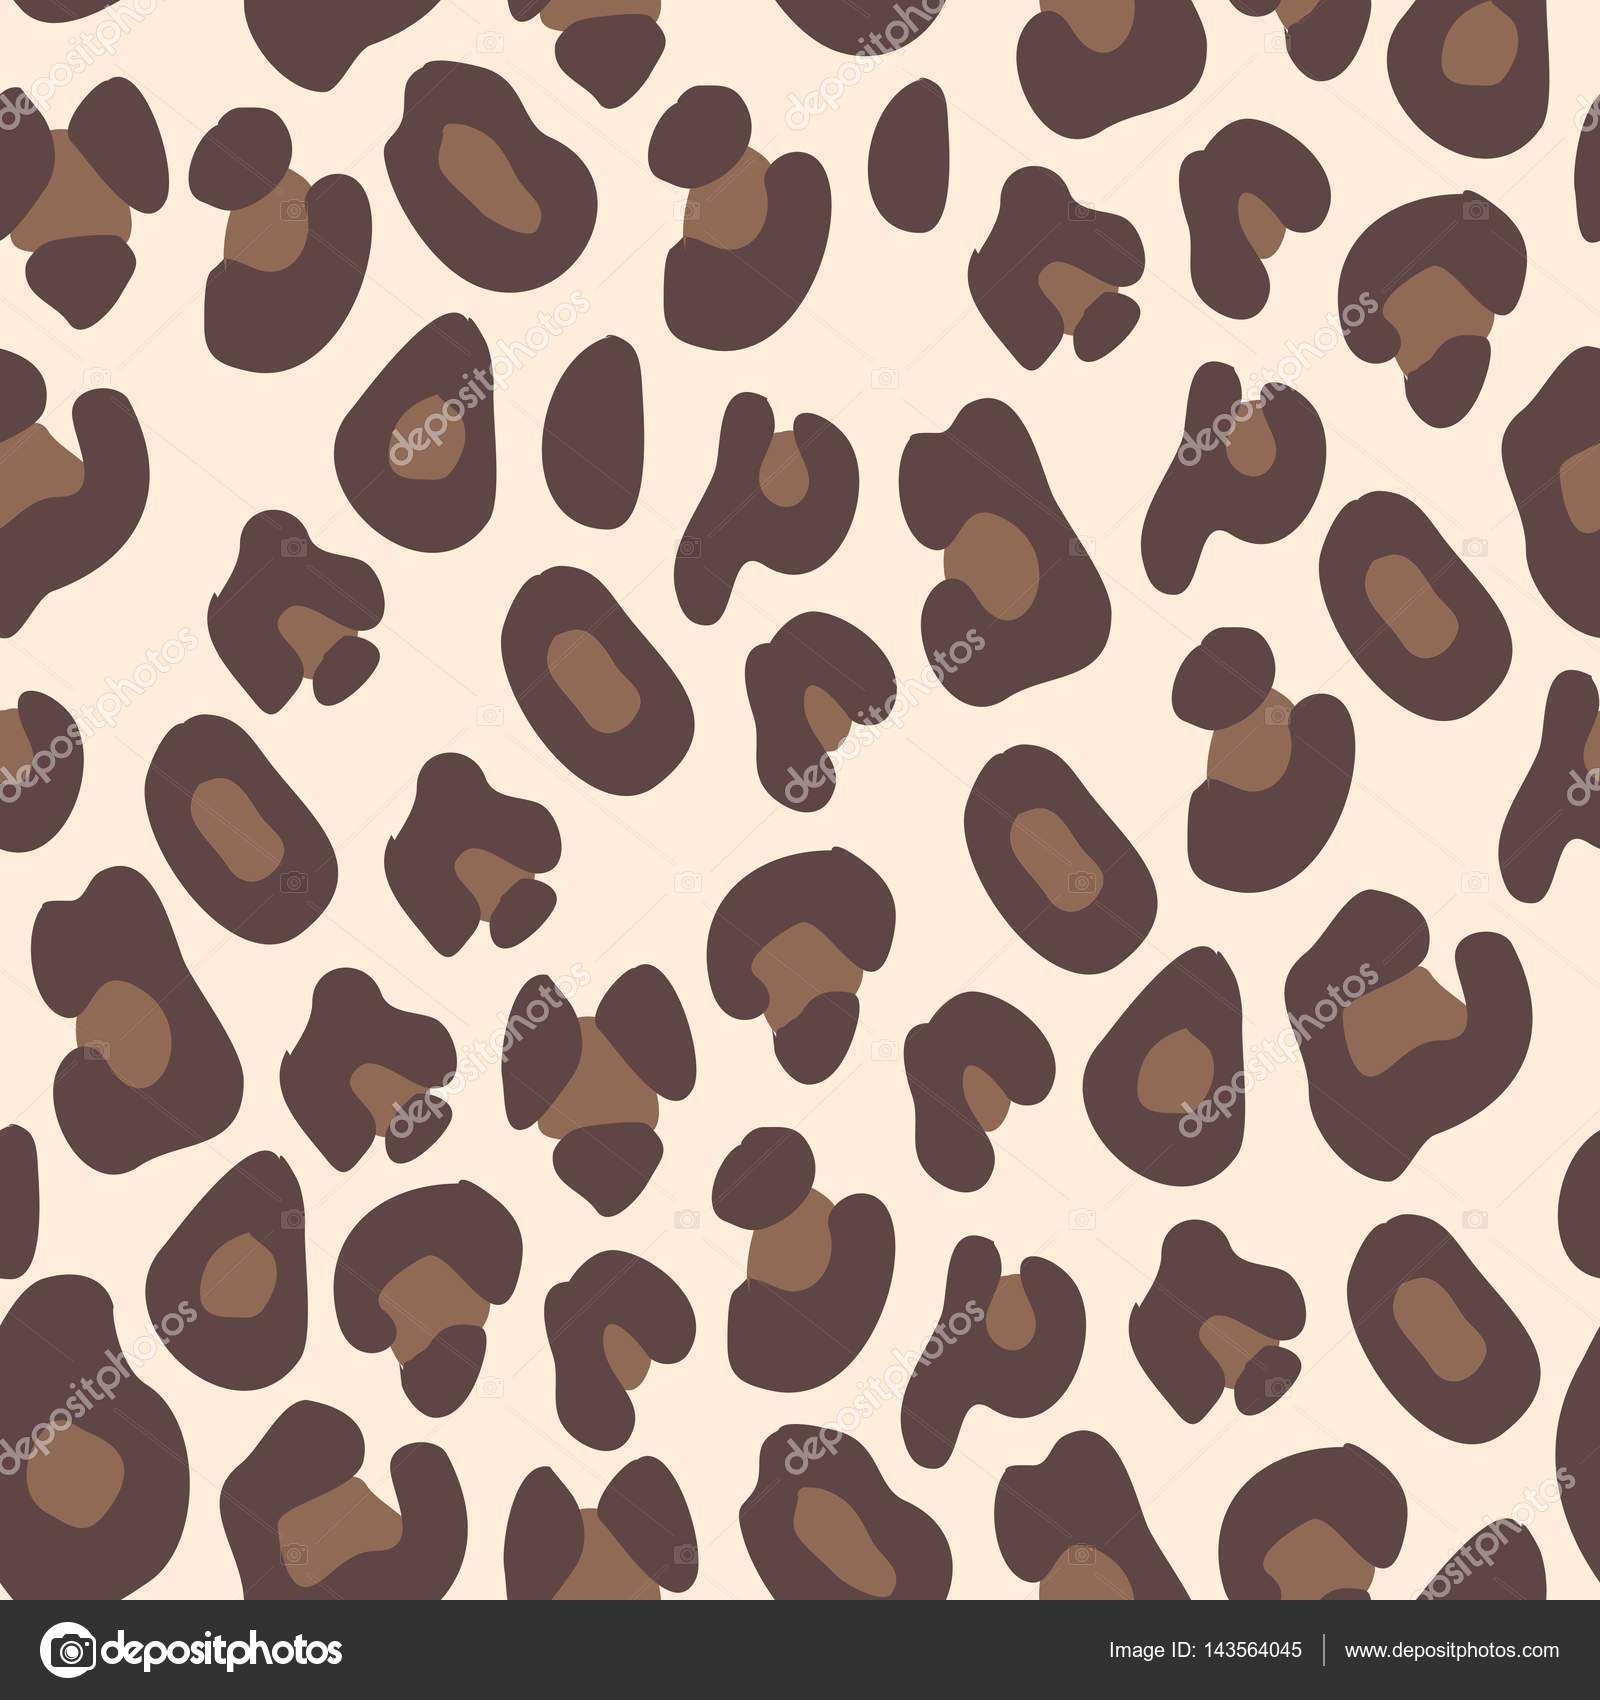 Leopard Pattern Seamless Vector Background Vector Image By C Elonalaff Vector Stock